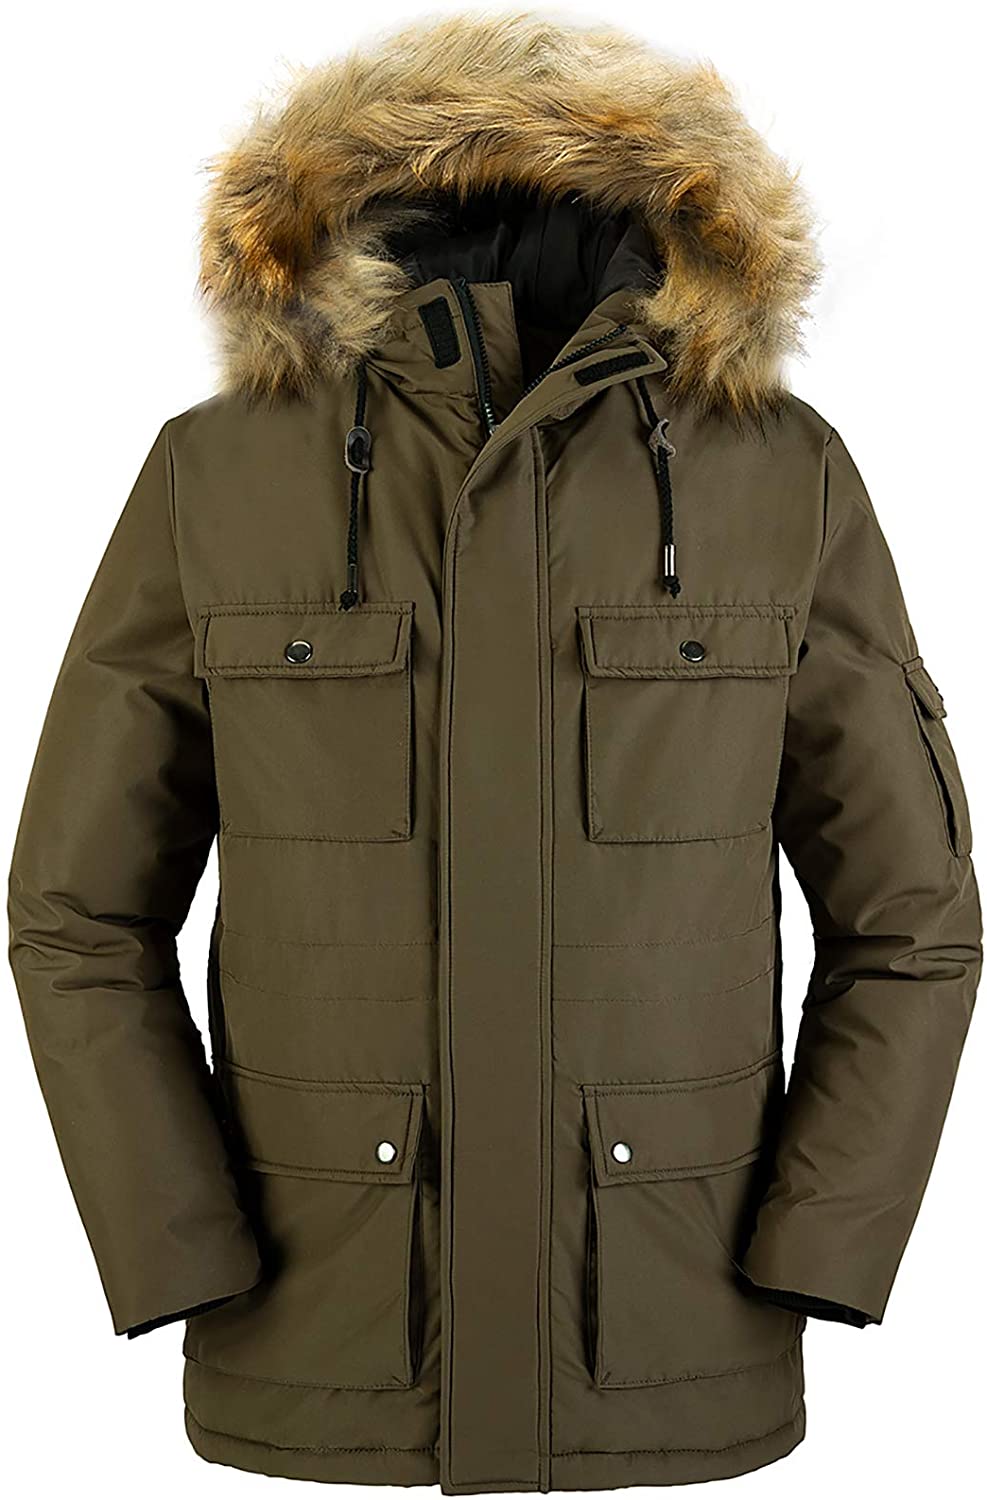 Wantdo Men's Thicken Puffer Jacket Insulated Water-Resistant Warm Winter Coat with Hood 